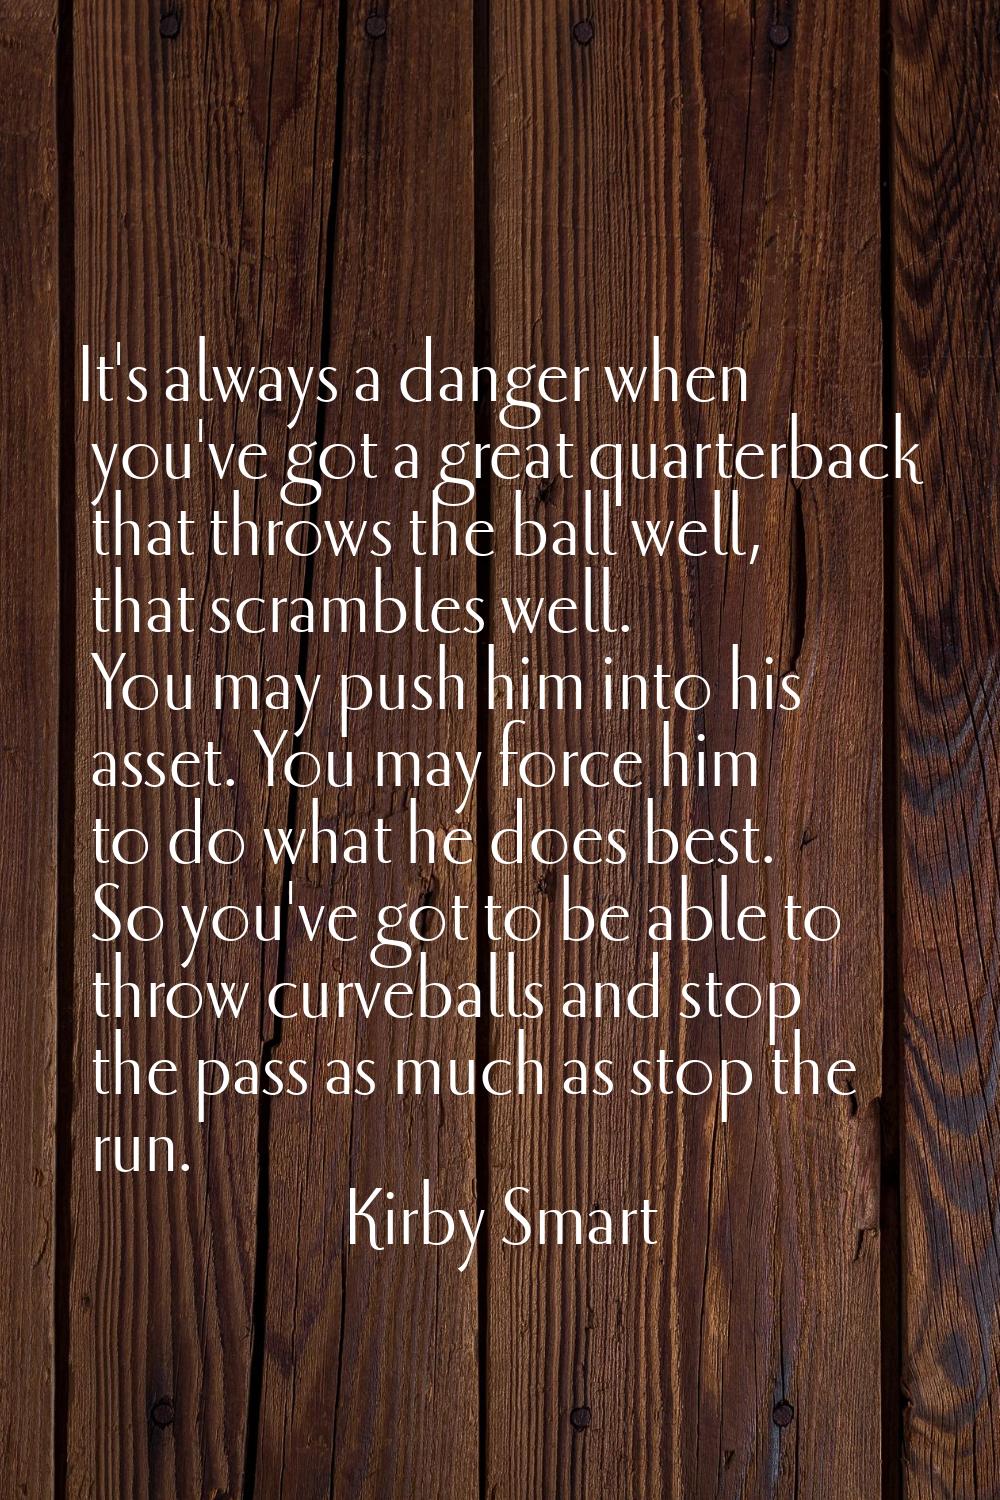 It's always a danger when you've got a great quarterback that throws the ball well, that scrambles 